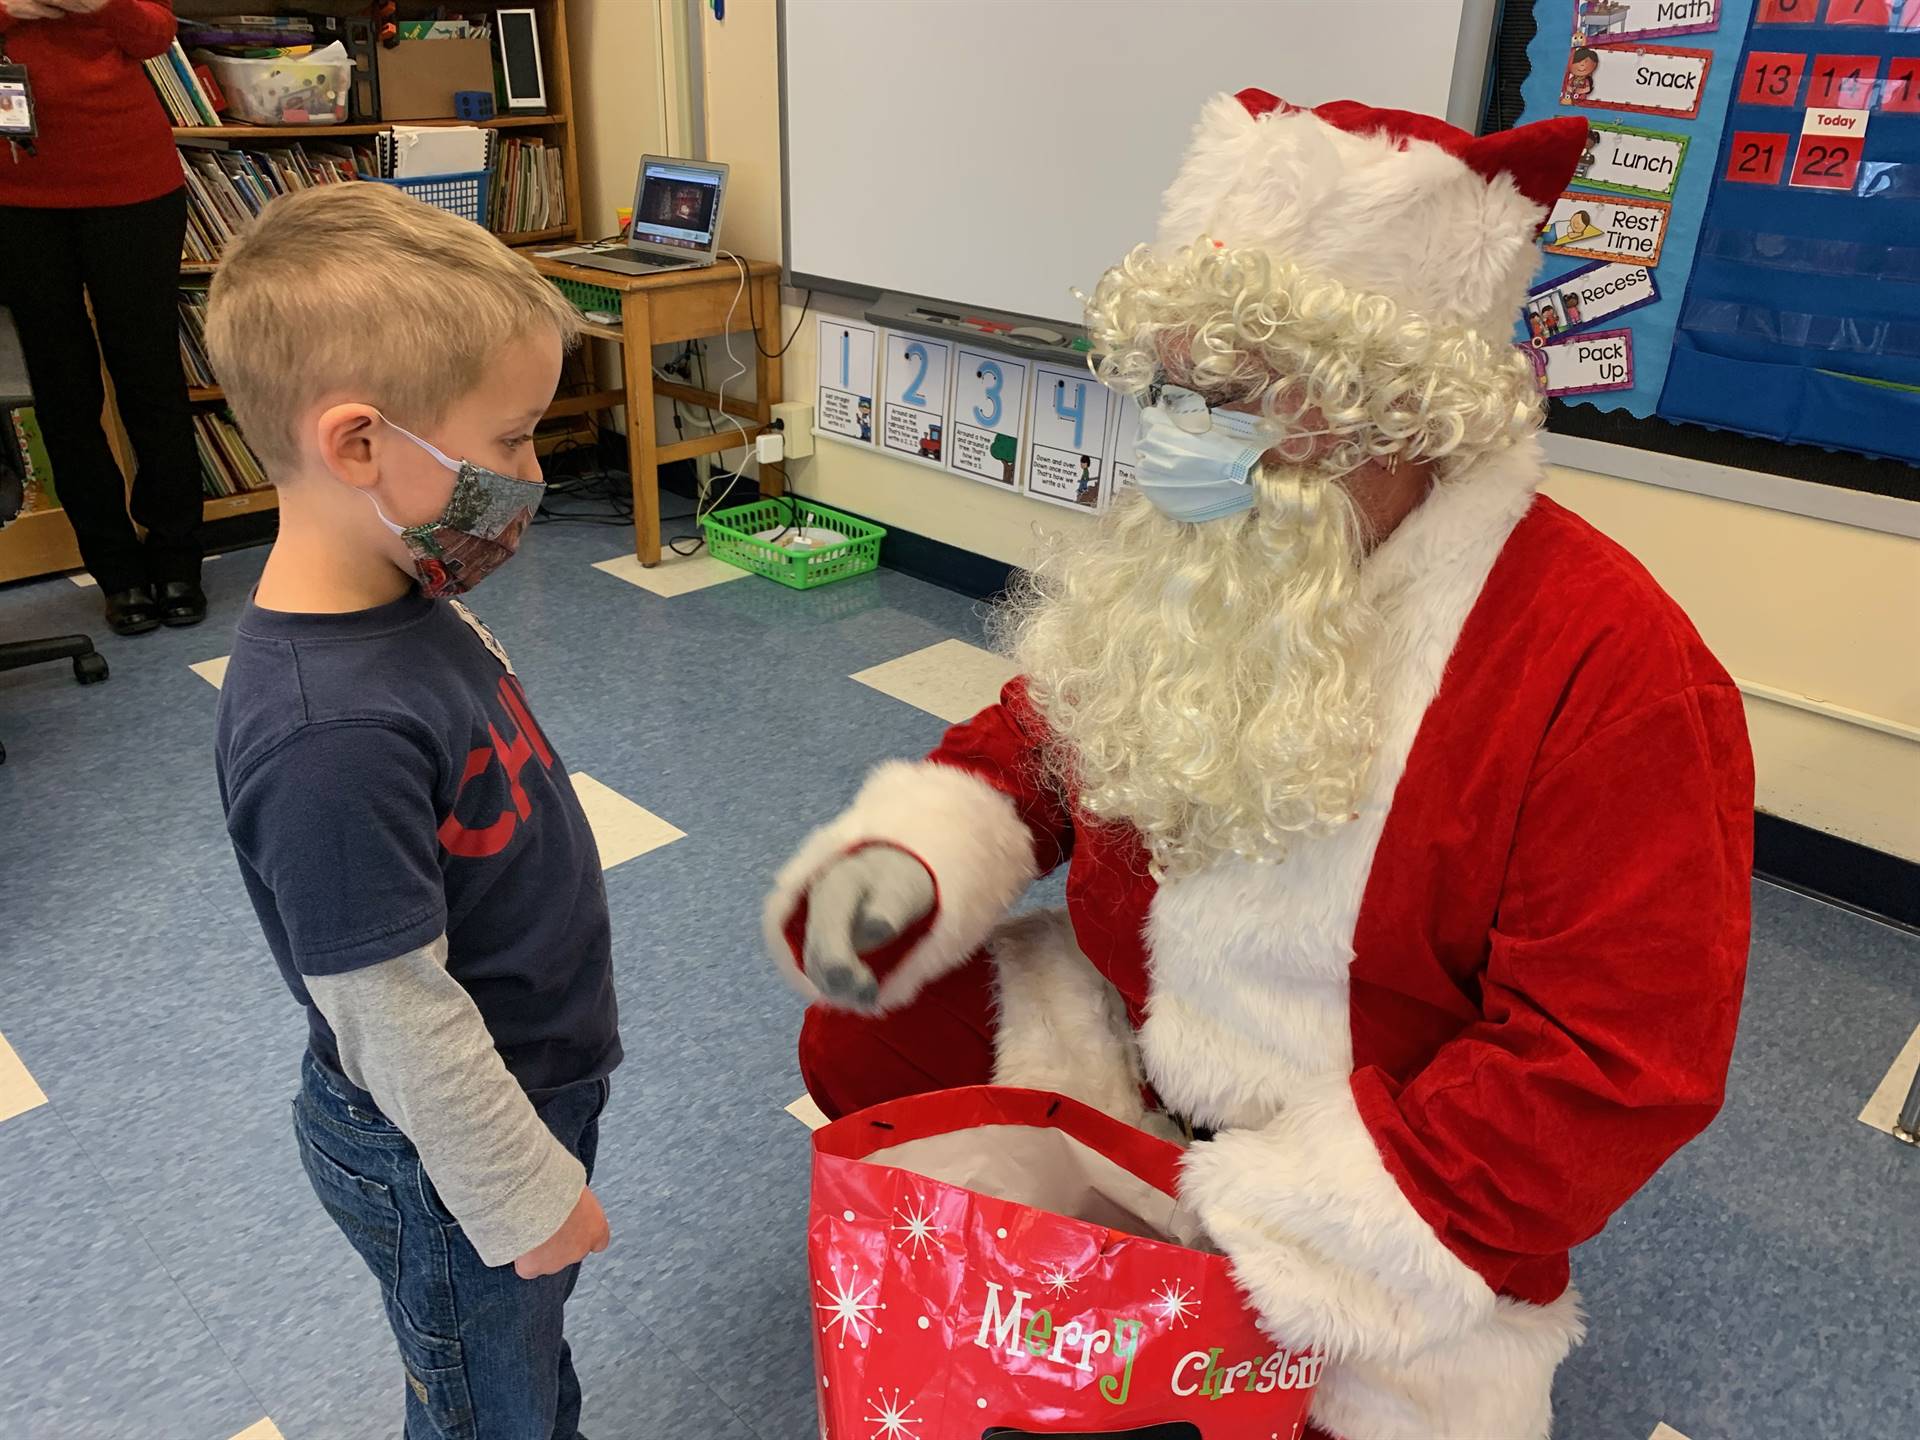 Santa and a student talk about being on the good list.